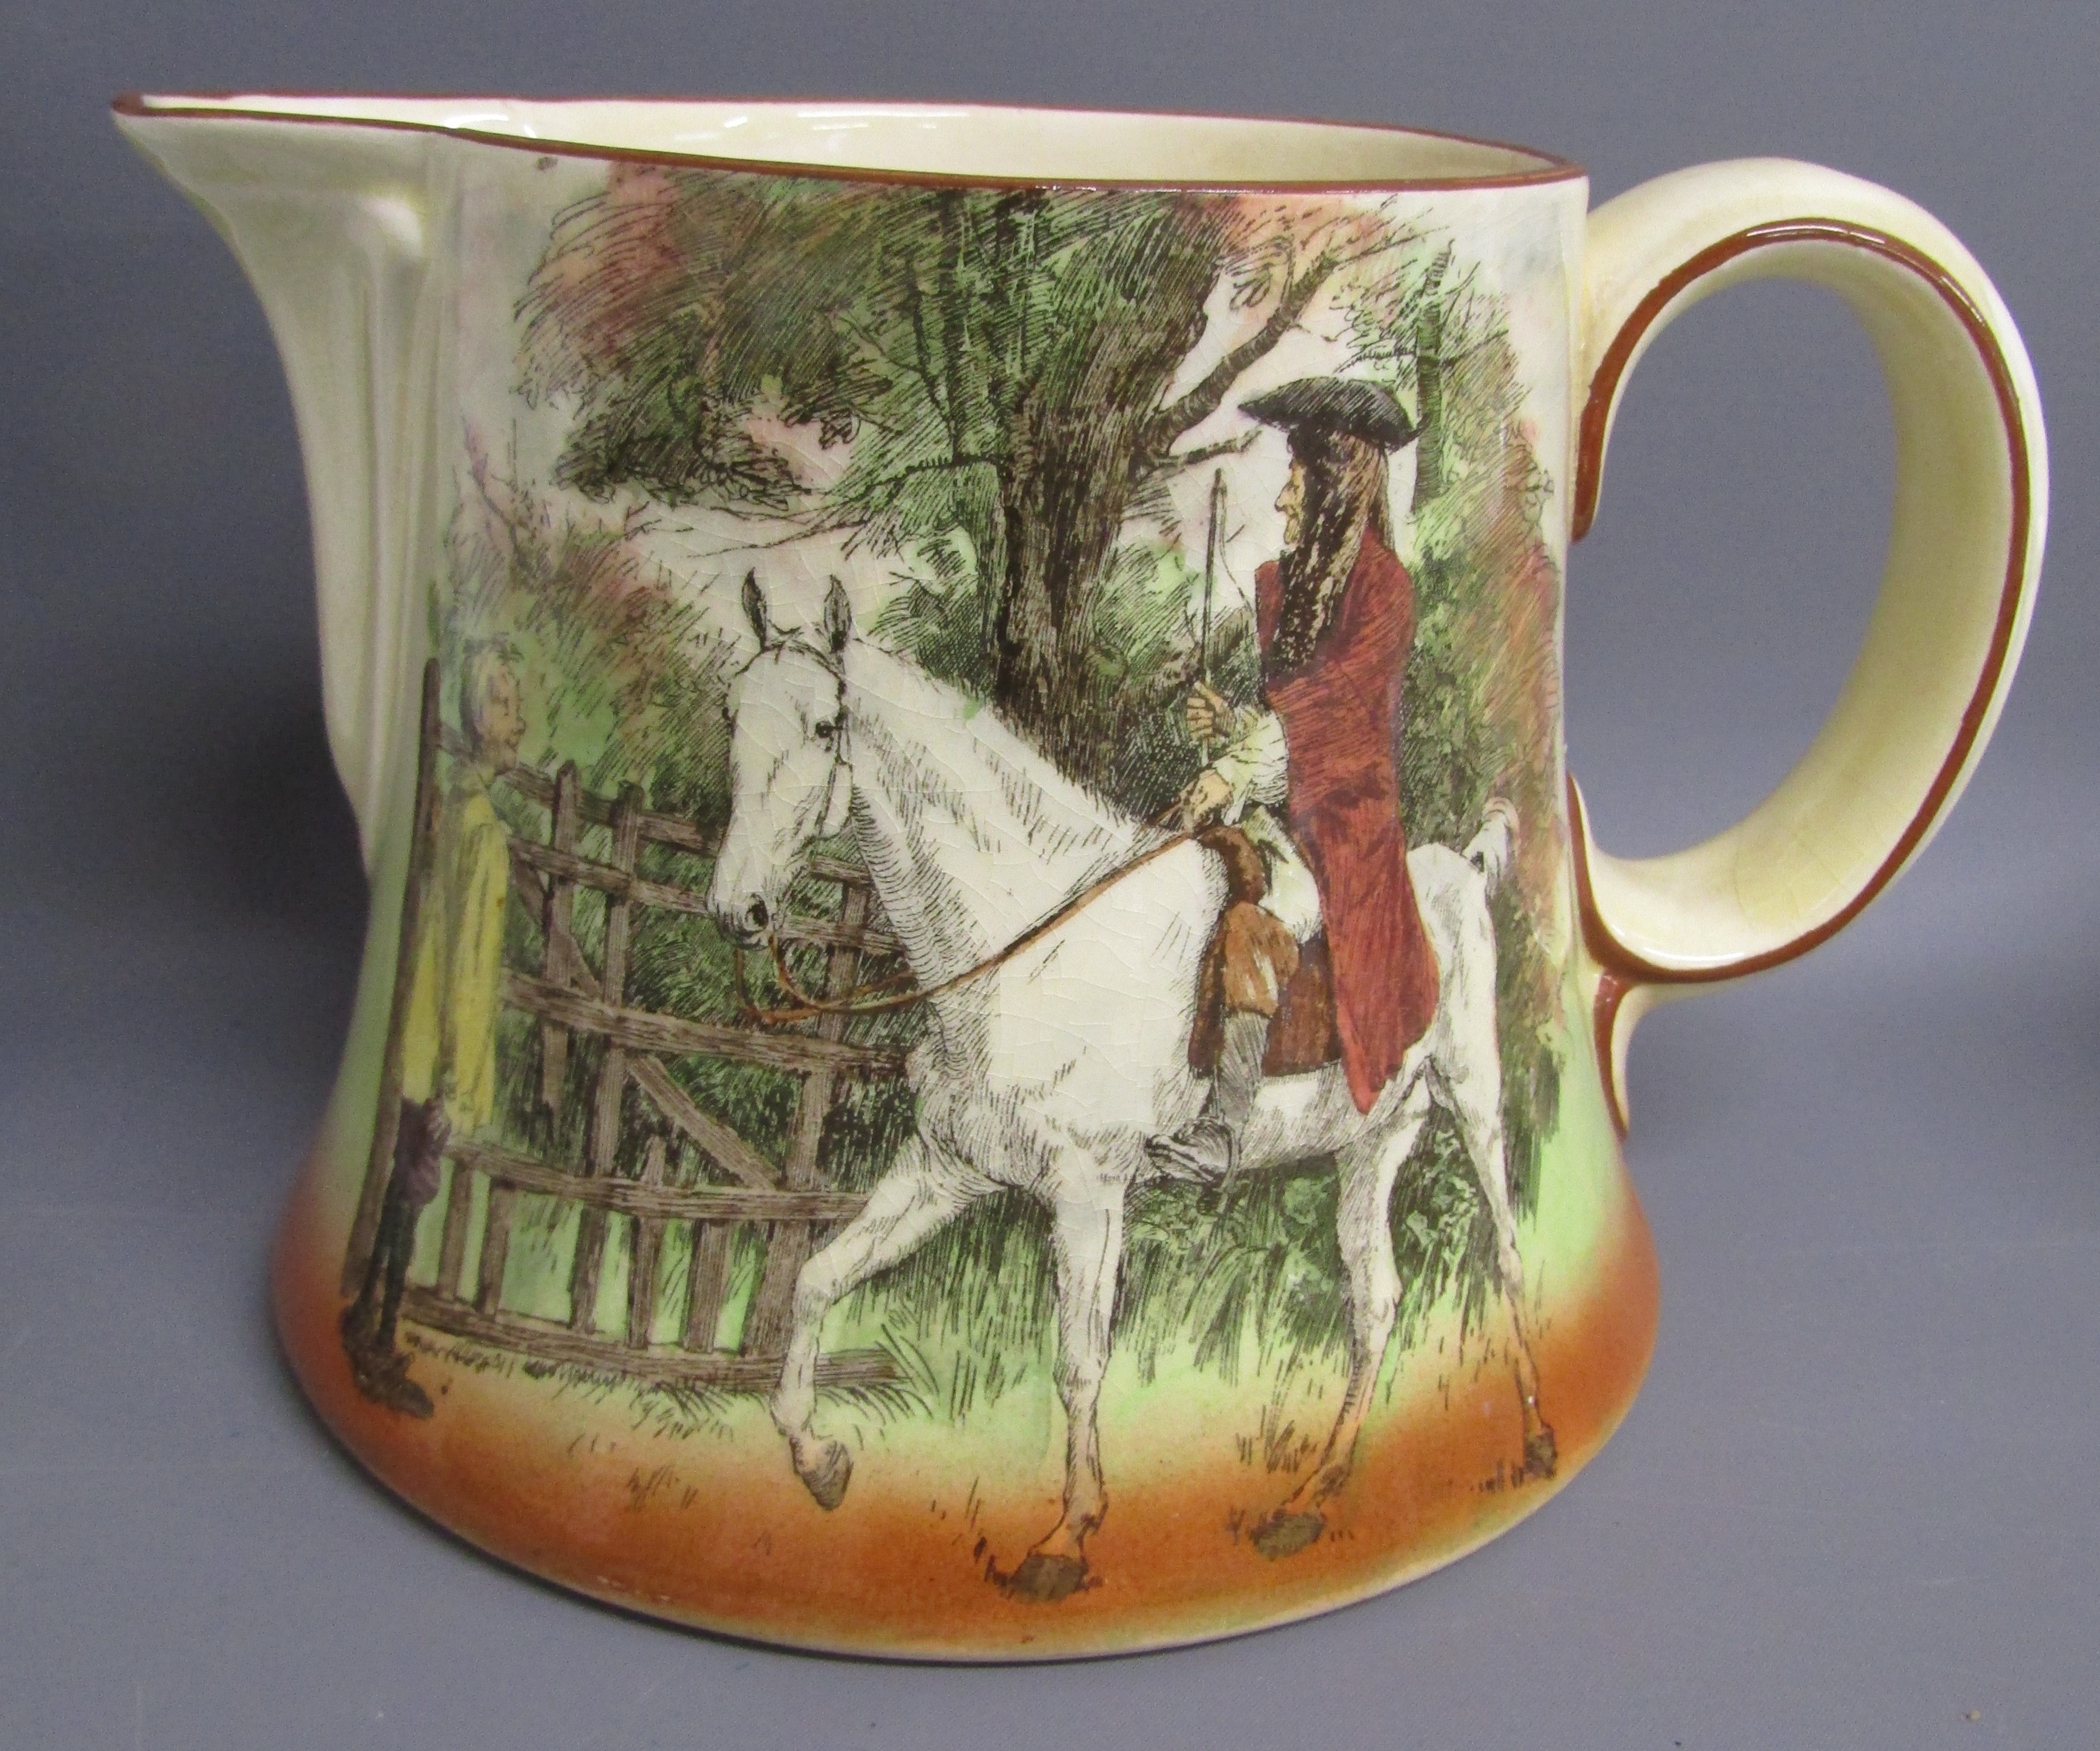 Royal Doulton Sir Roger de Coverley jug, Crown Staffordshire 15646 teacups and saucers along with - Image 4 of 6